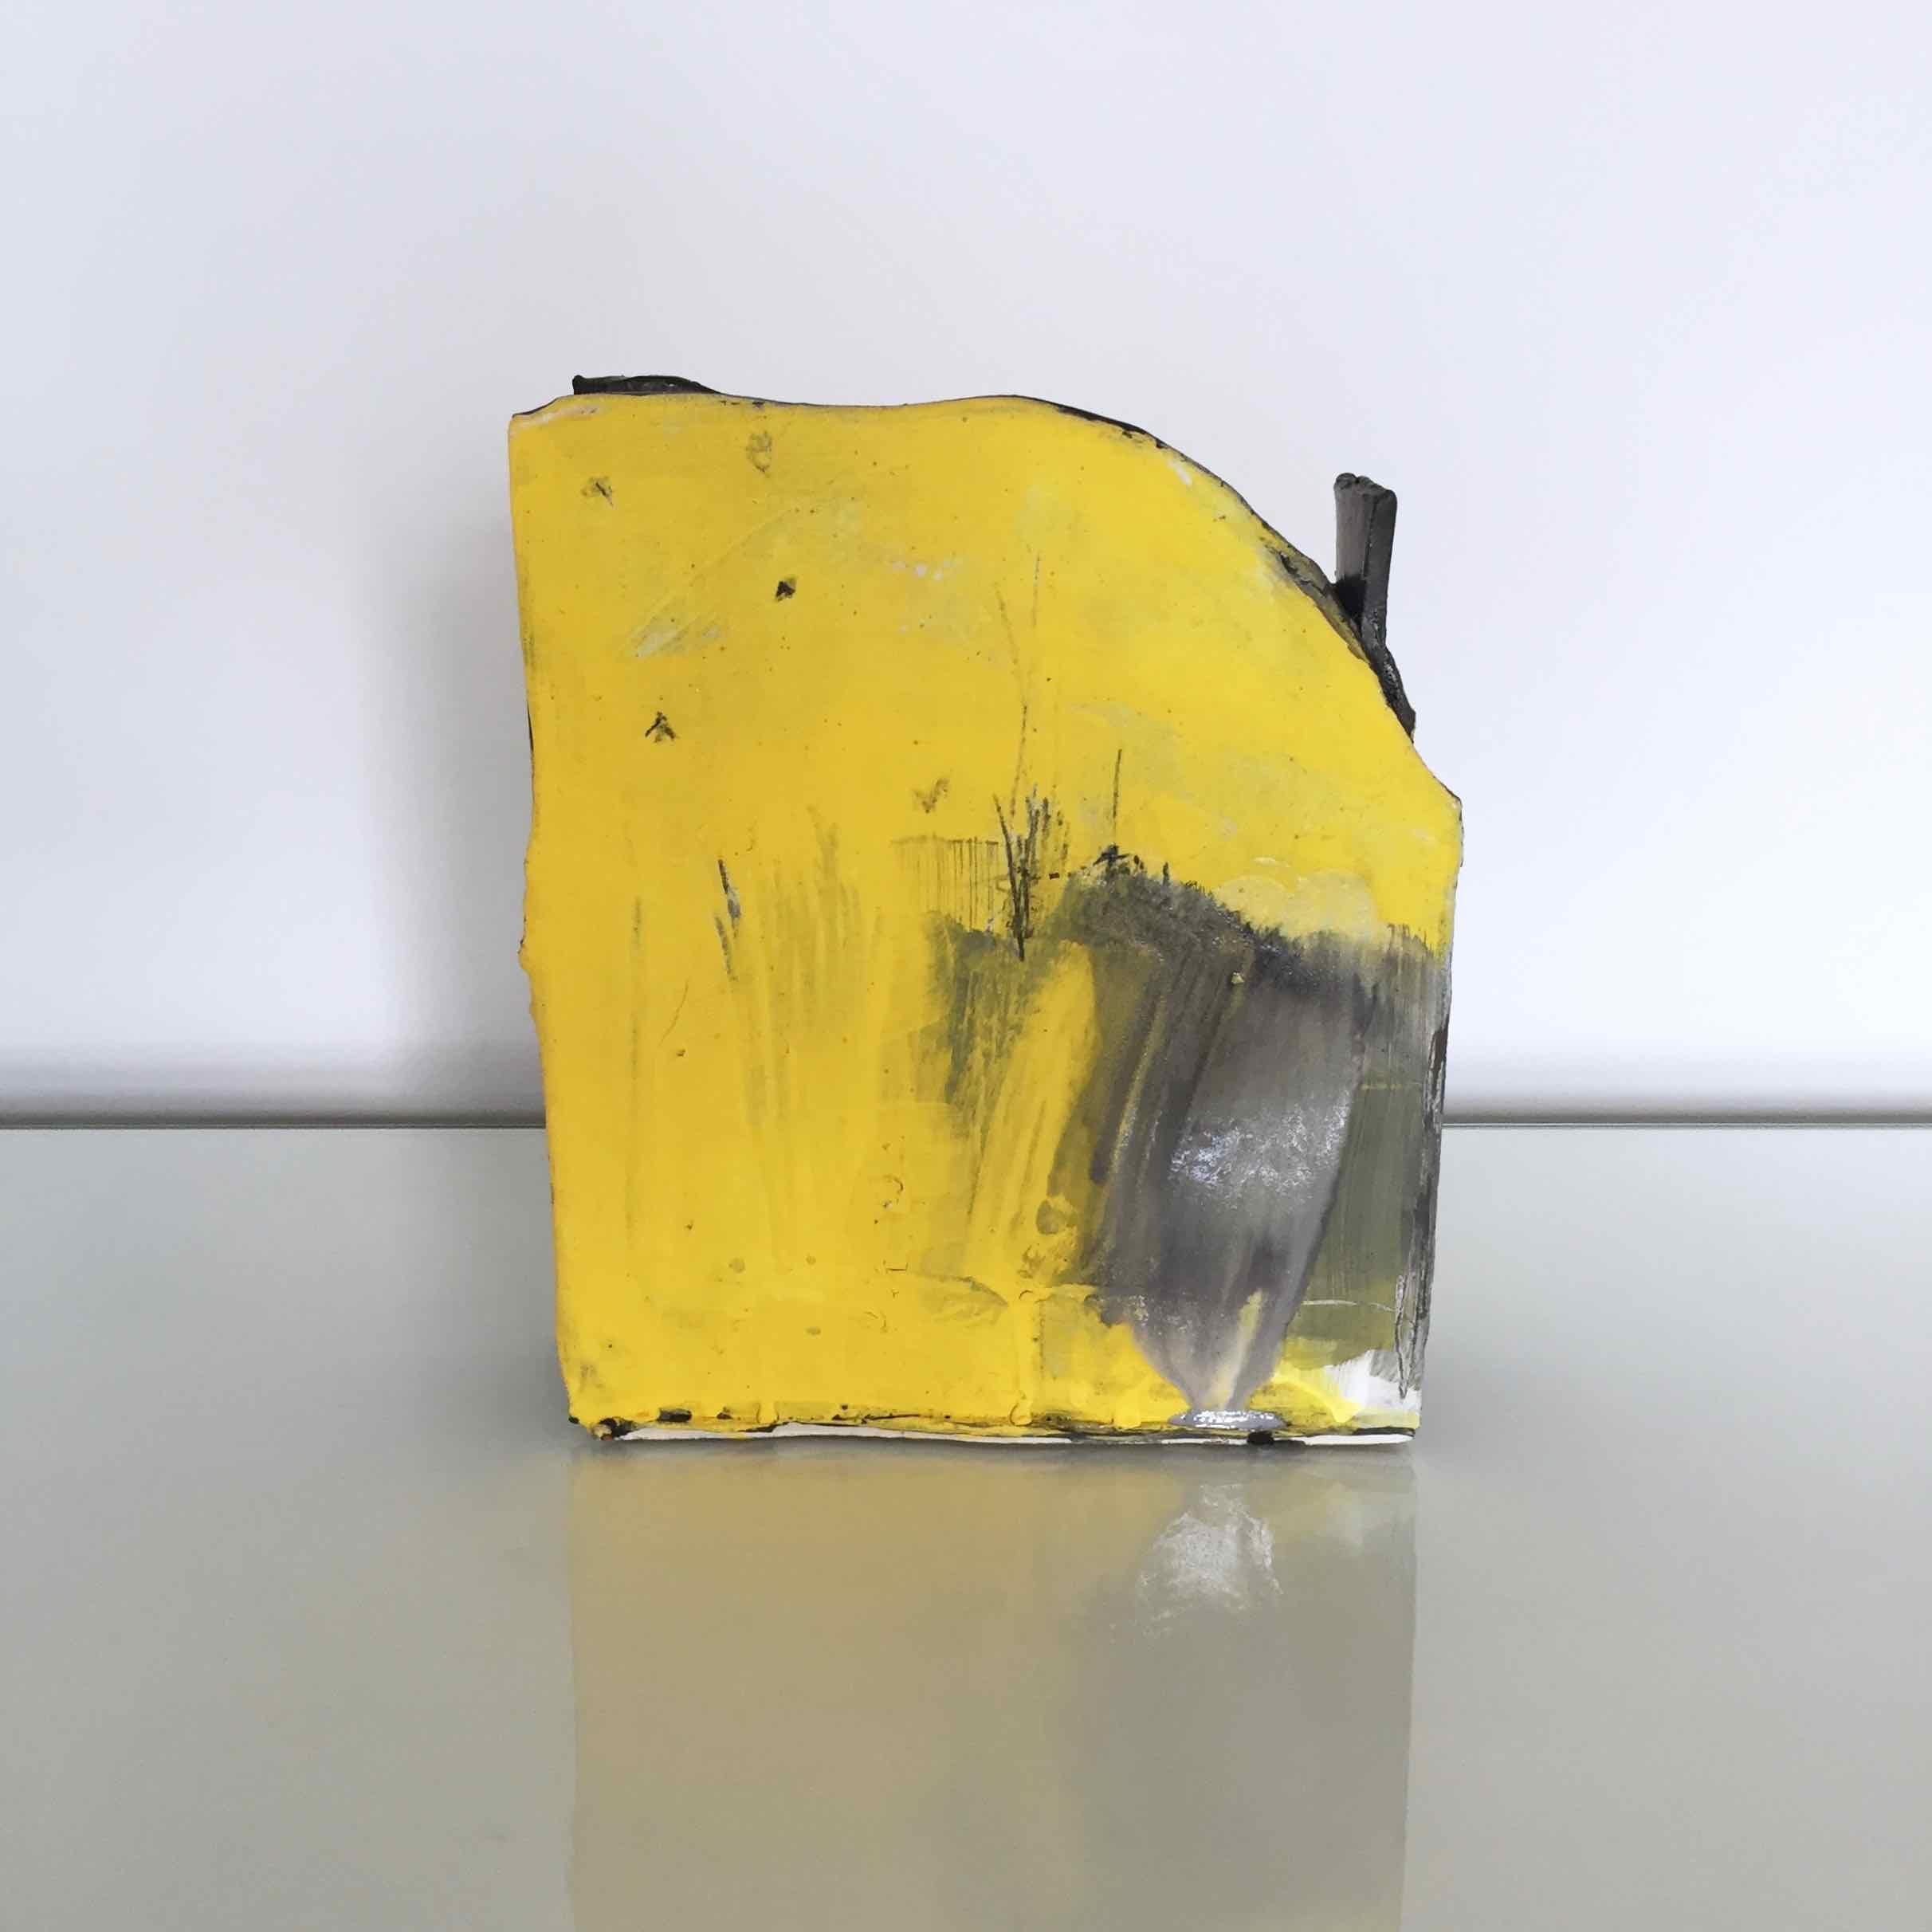 This ceramic vessel is one of Barry’s iconic slab works. His ceramics are influenced by drawings made within the land, exploring relationships between colour, texture and form, and motivated by surrounding light, atmosphere and colours.  They are